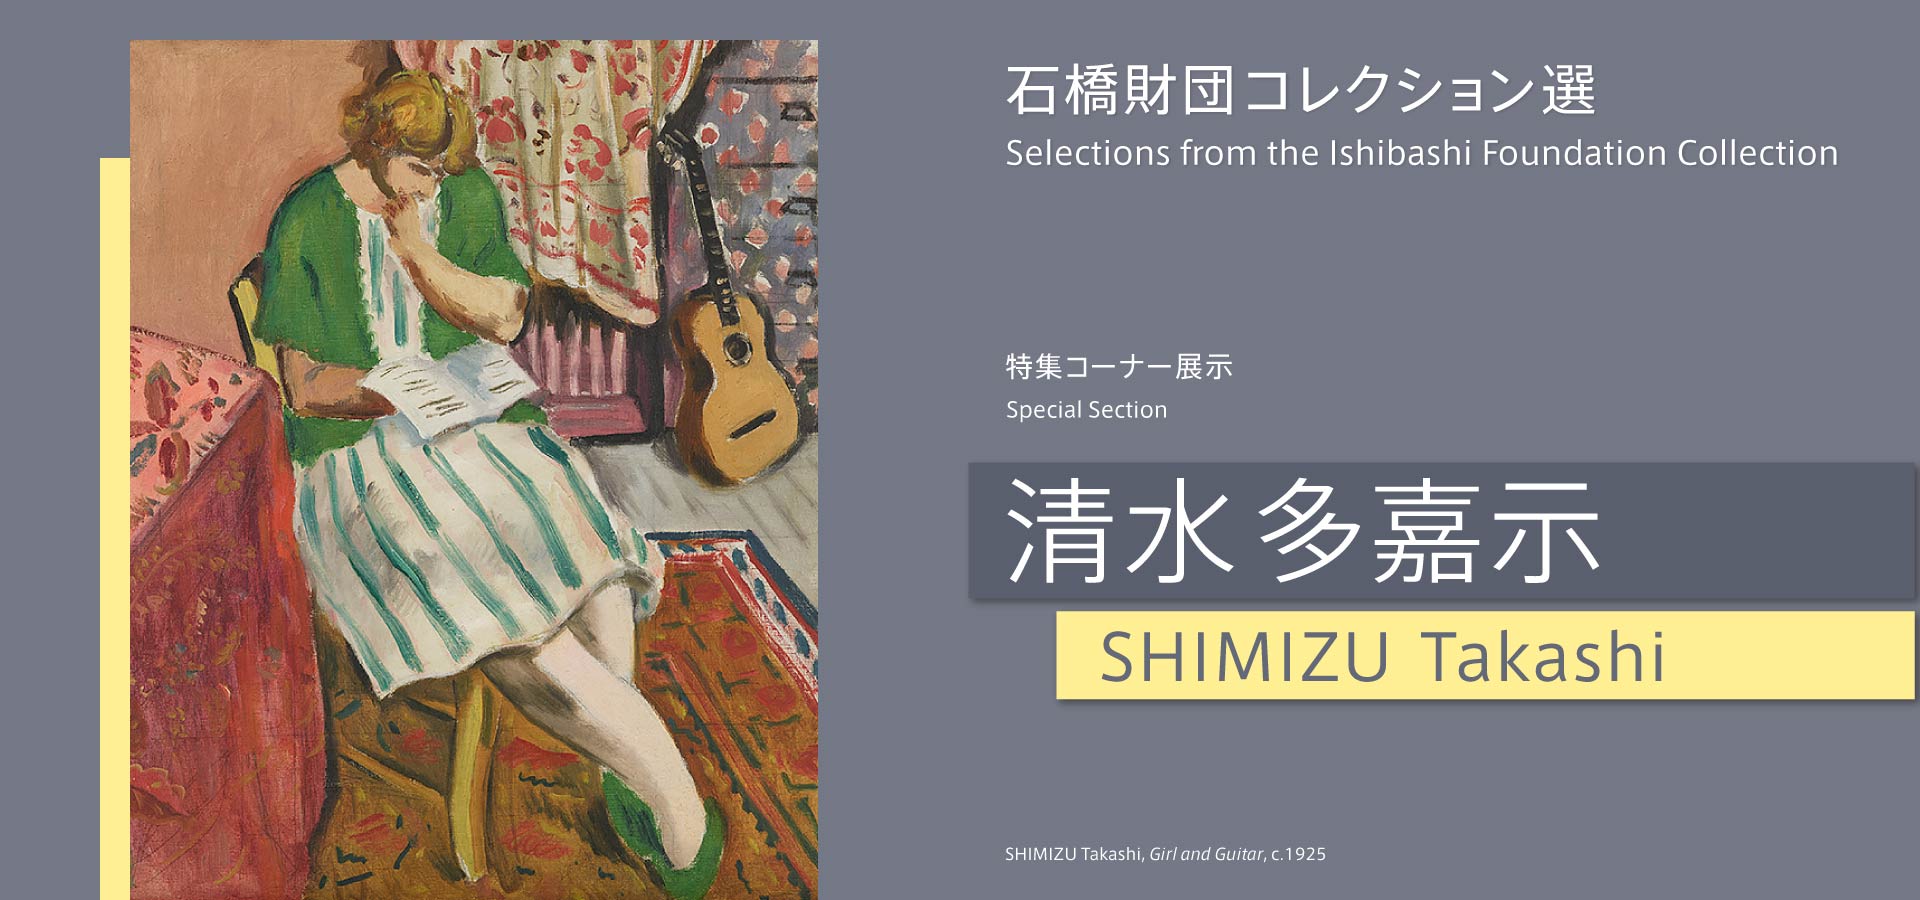 Selections from the Ishibashi Foundation Collection Special Section SHIMIZU Takashi